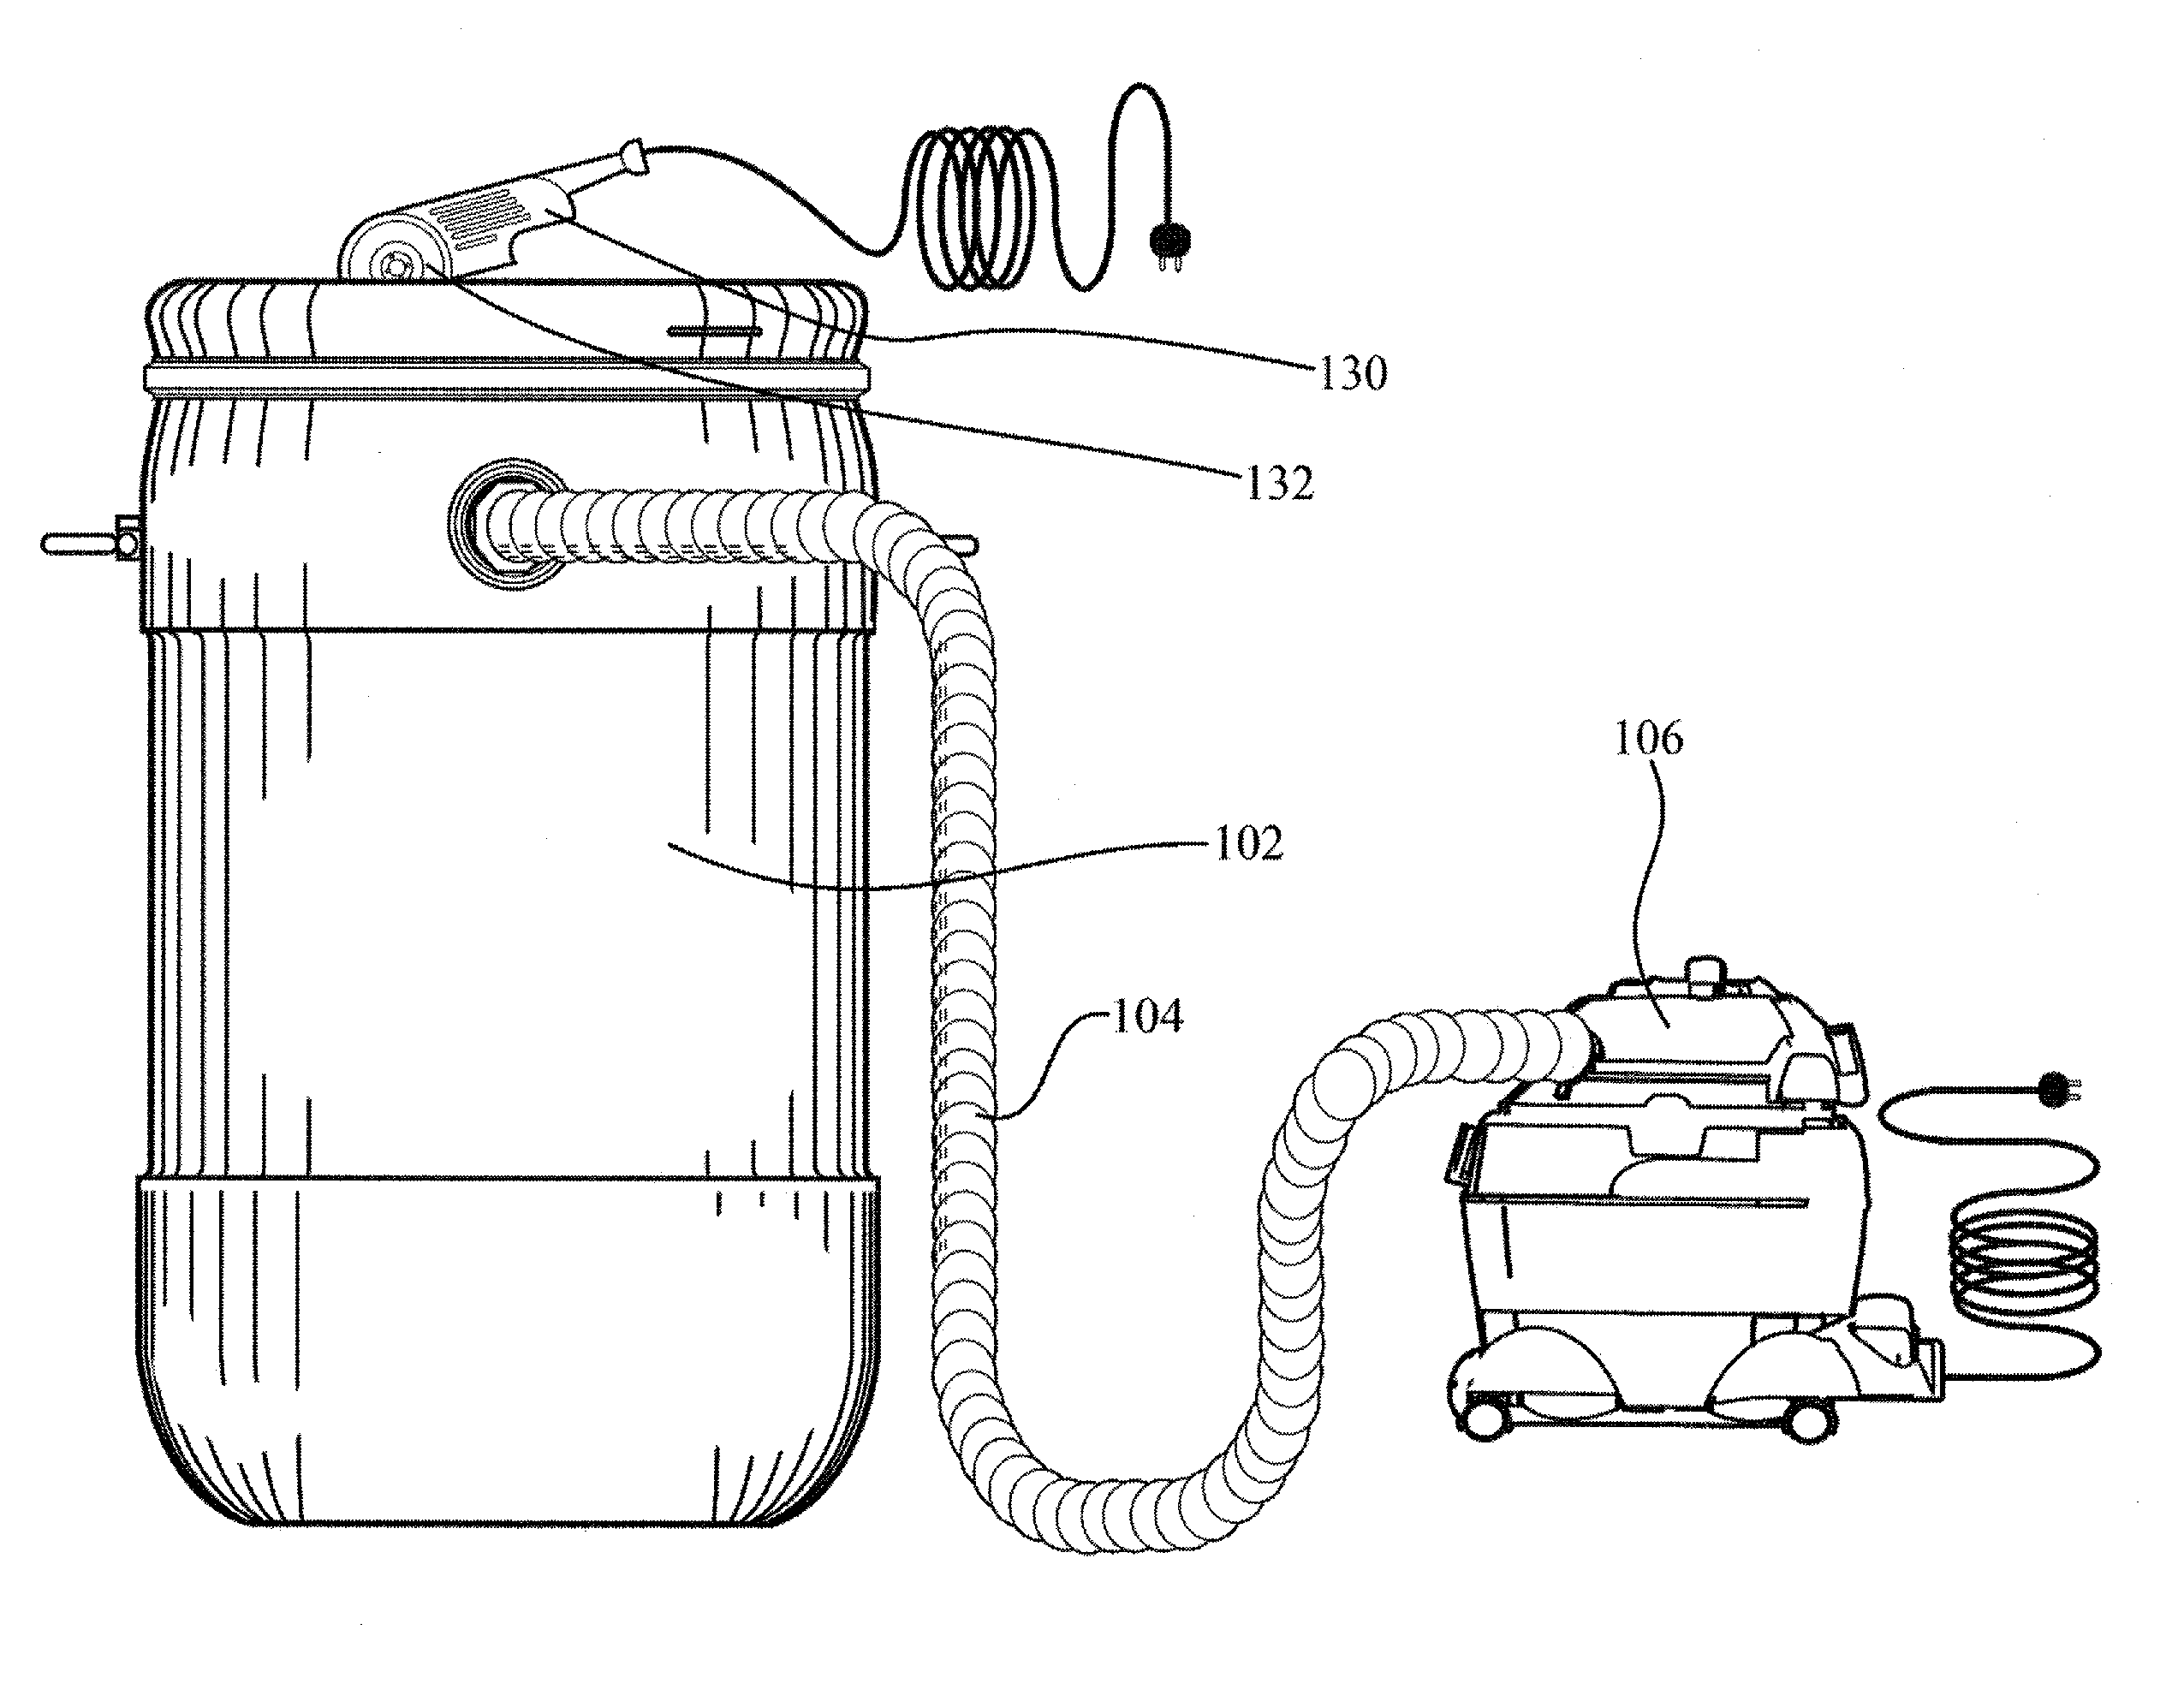 Tile cutting and dust collection system